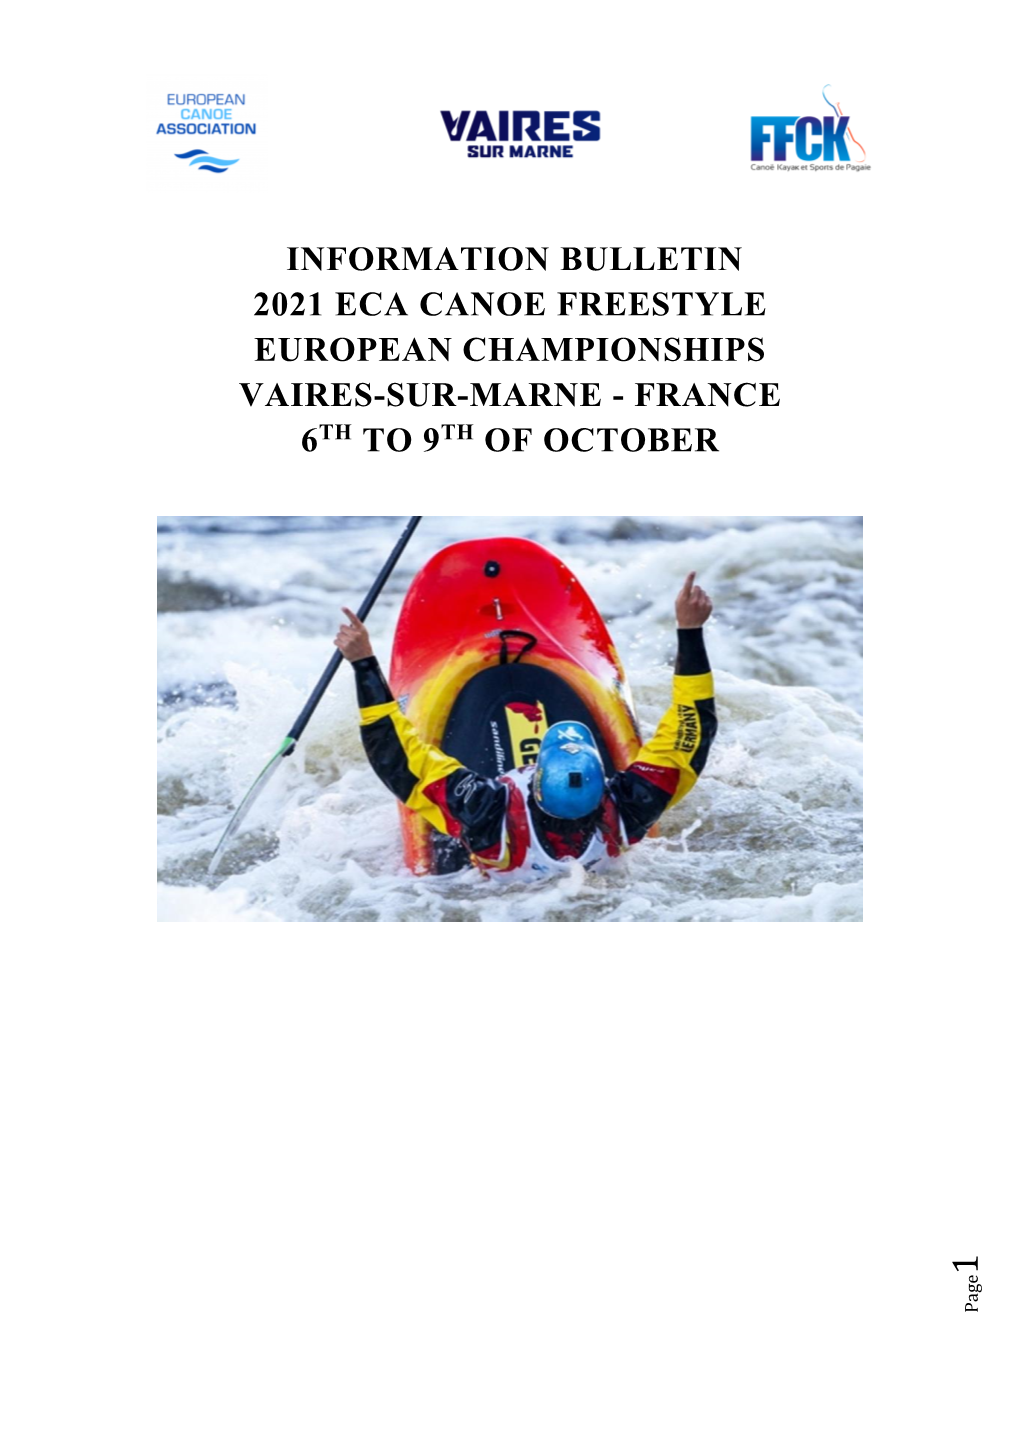 2021 Eca Canoe Freestyle European Championships Vaires-Sur-Marne - France 6Th to 9Th of October